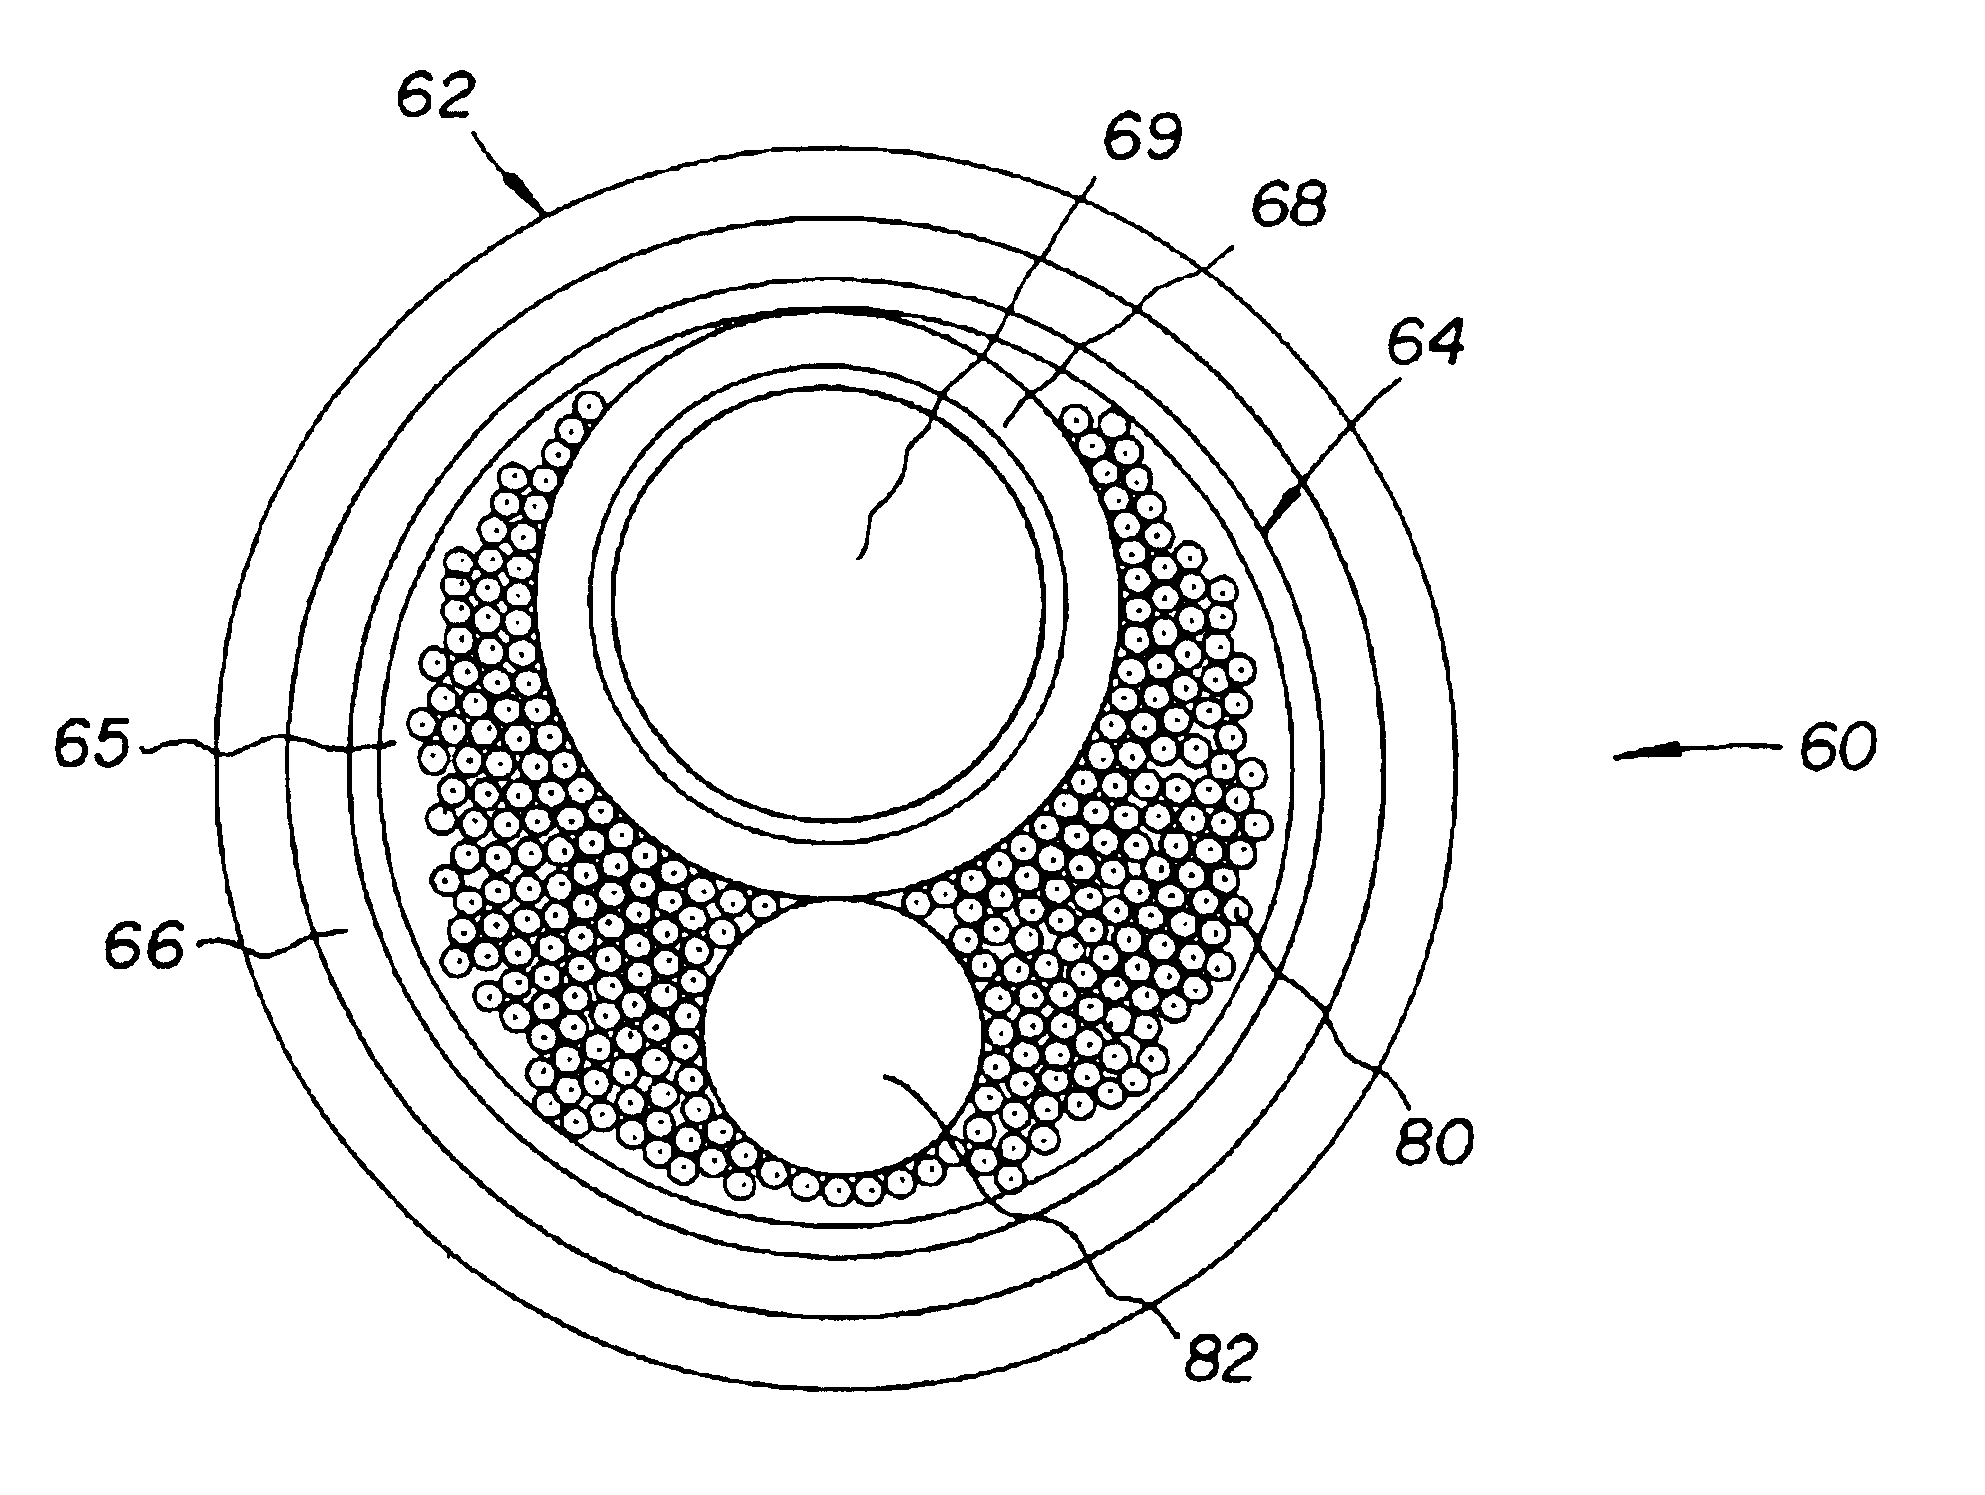 Apparatus and method for intraductal cytology